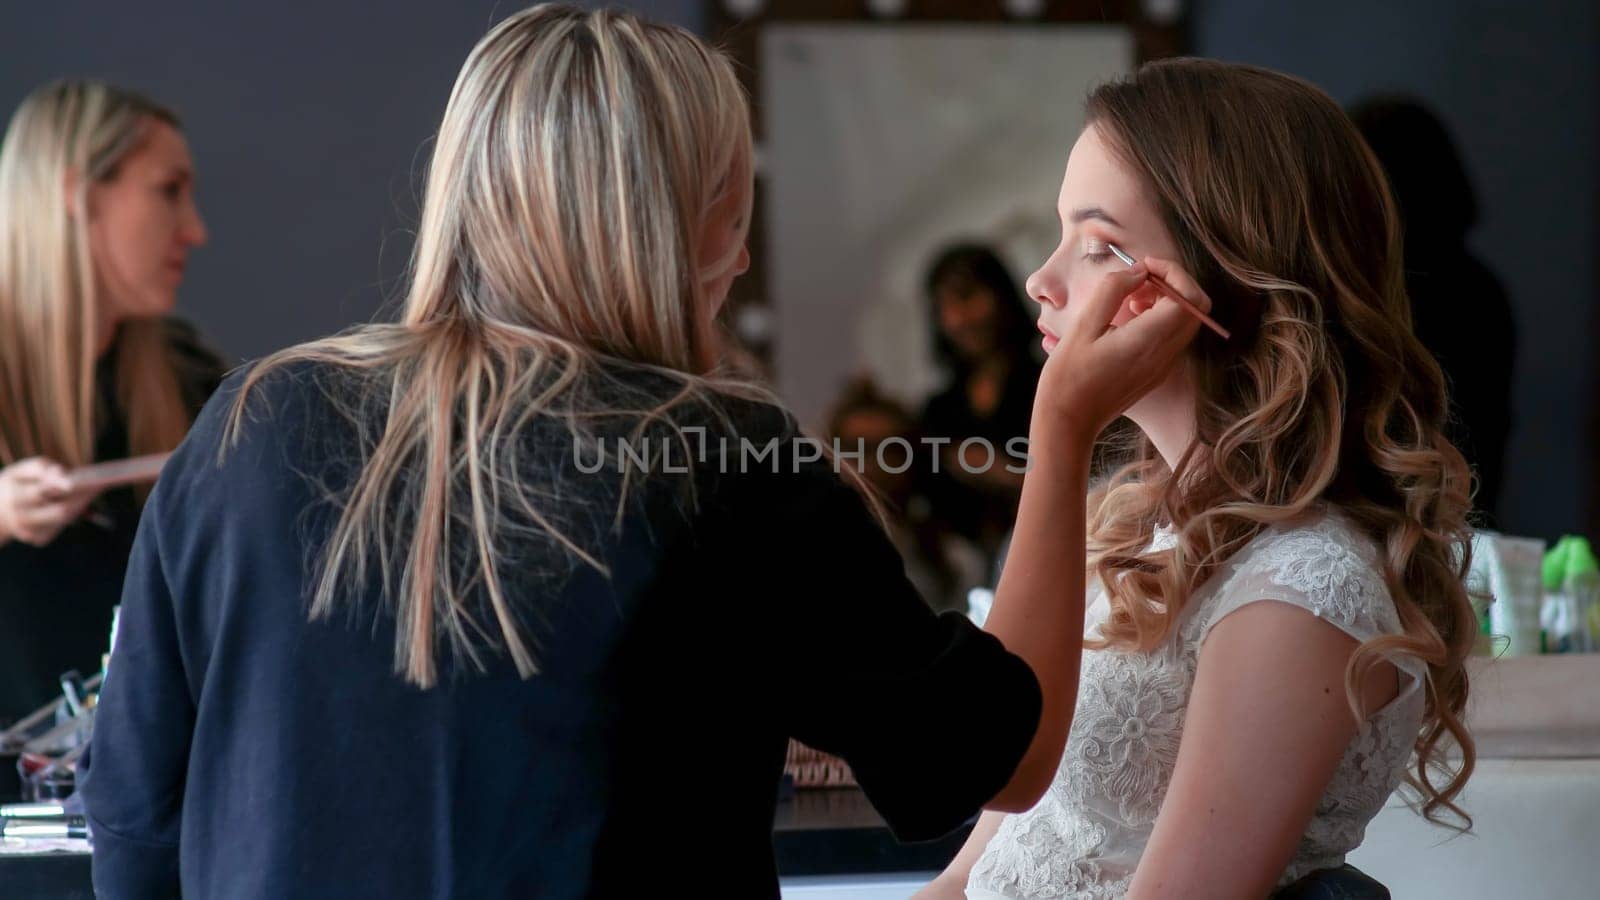 Makeup artist paints the eyes of a girl model.